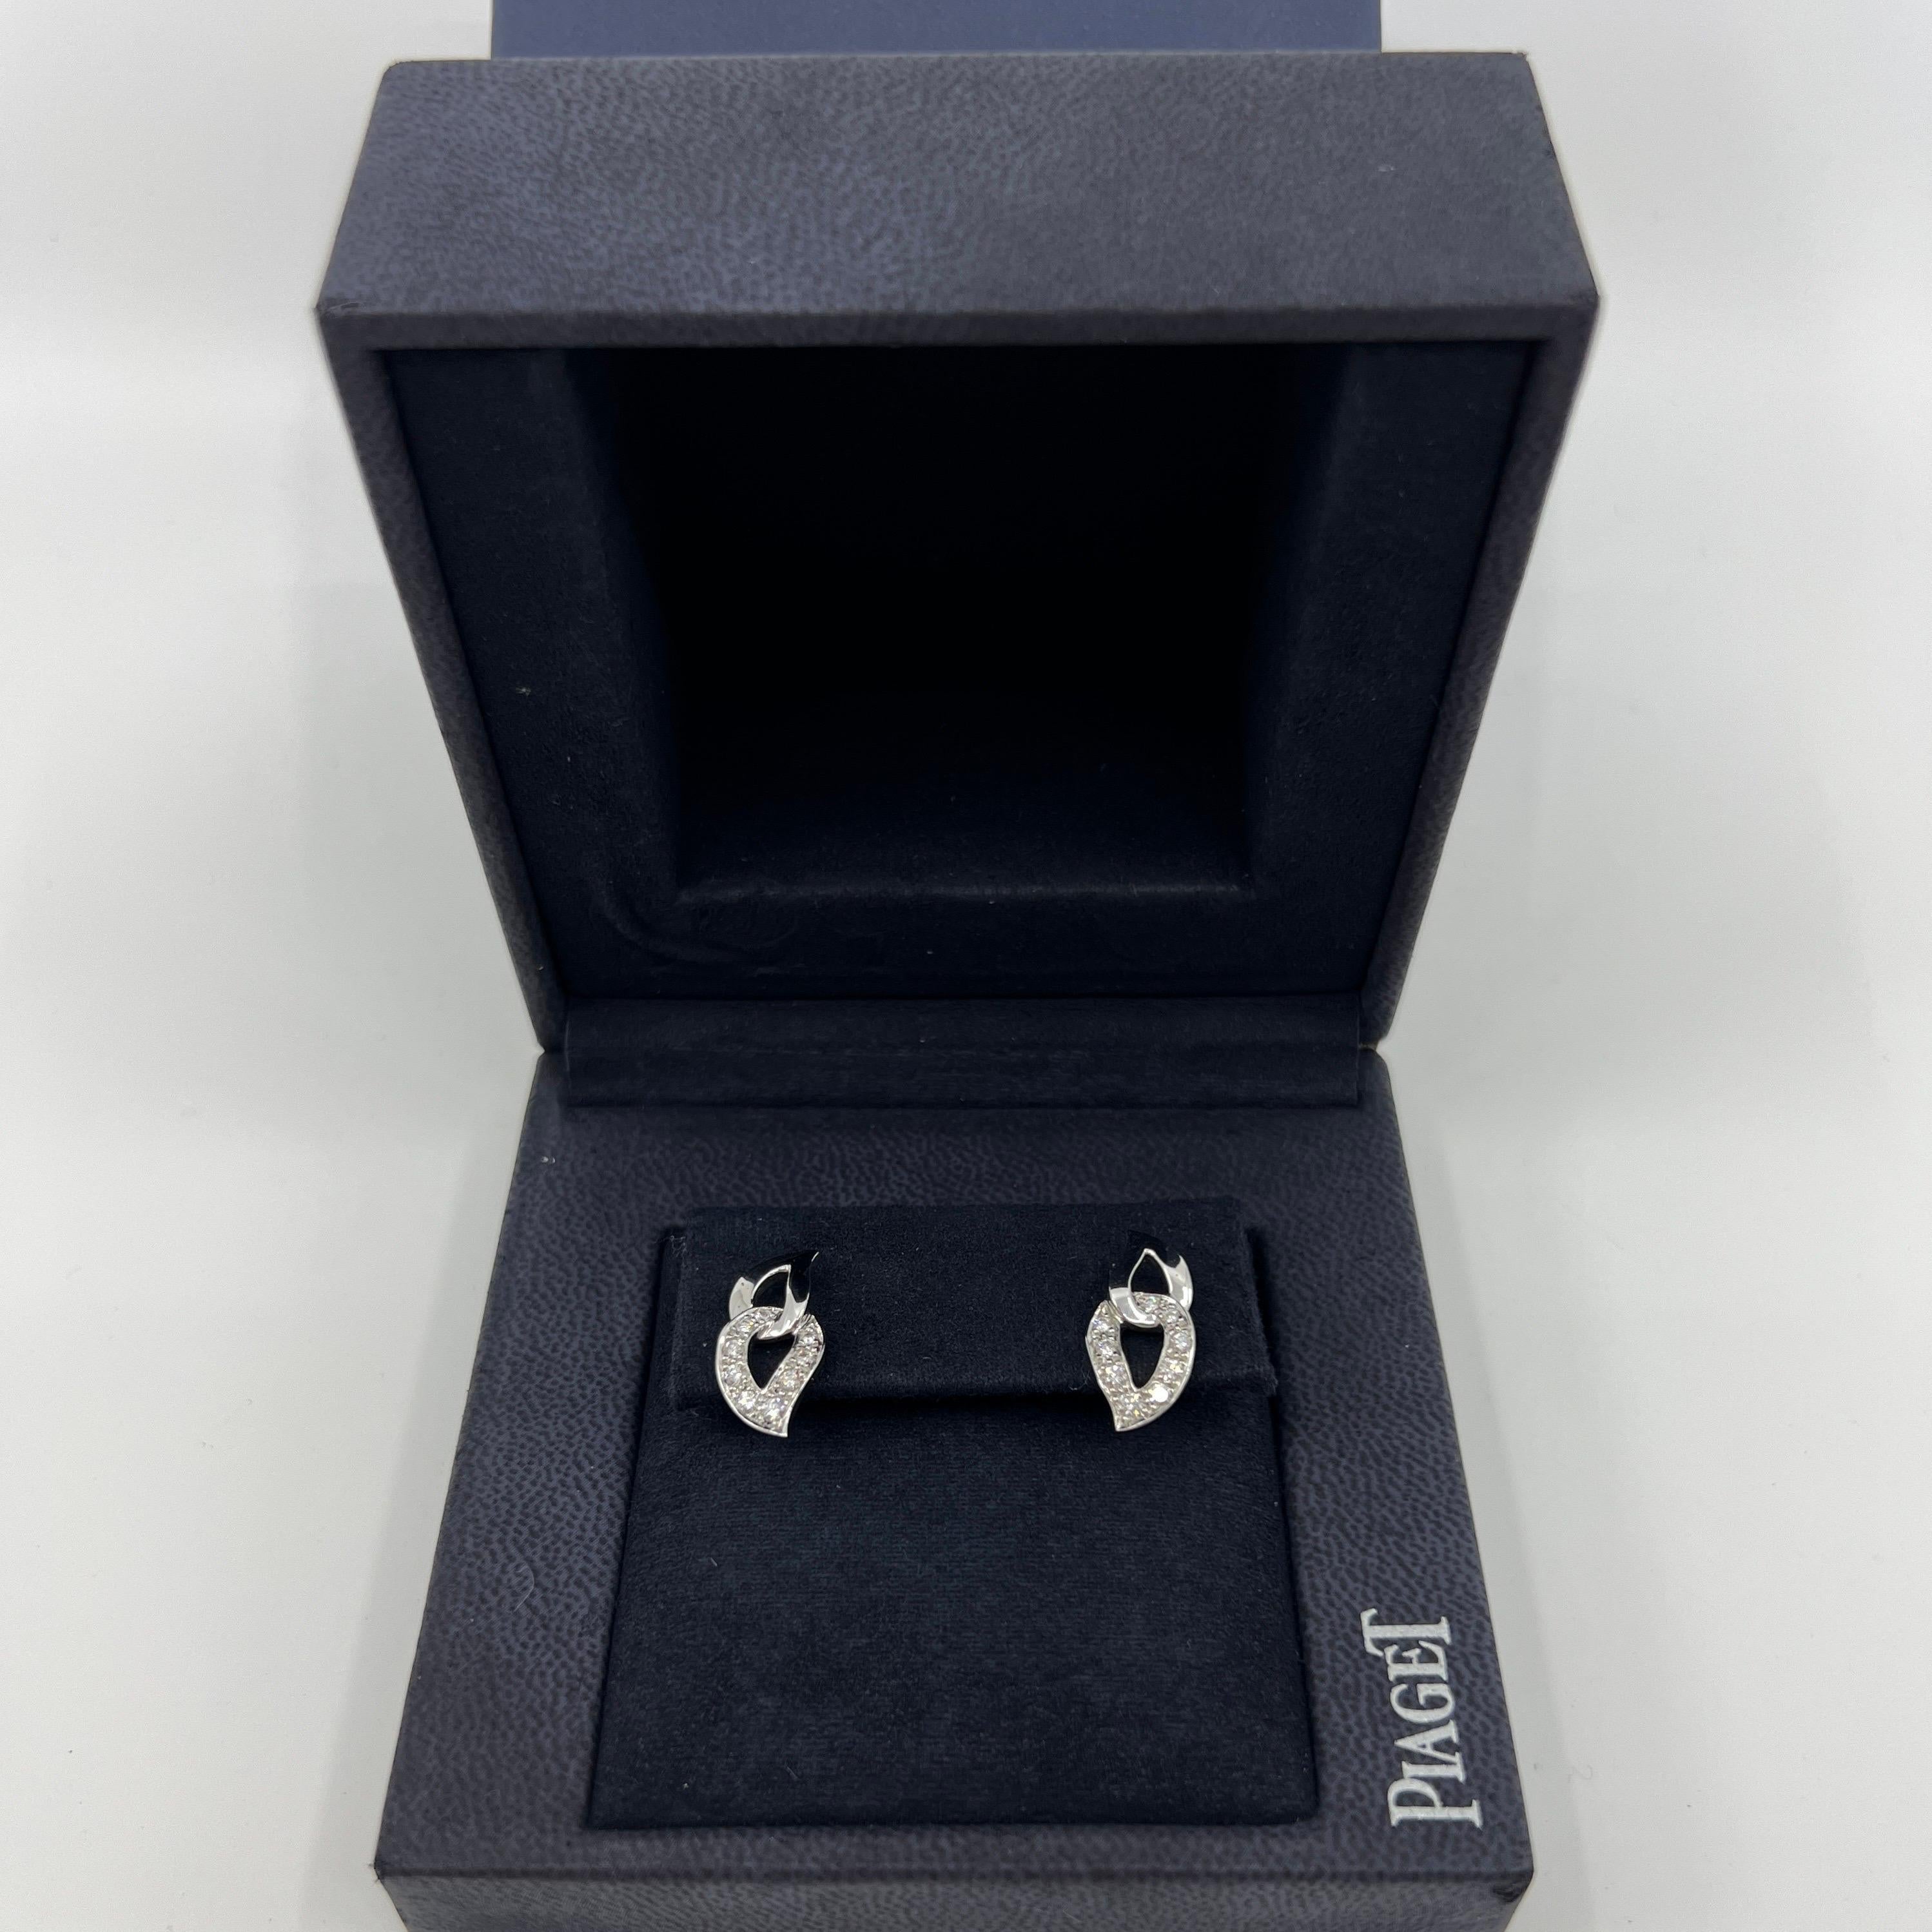 Vintage Piaget 18k White Gold Diamond Leaf Earring Studs.

Rare vintage diamond-set crossover leaf style earrings by PIAGET. 
Each earring is set with x9 brilliant round cut diamonds and measures approx. 19.2mm x 9.2mm. Weighing 5.8g total.

Rare